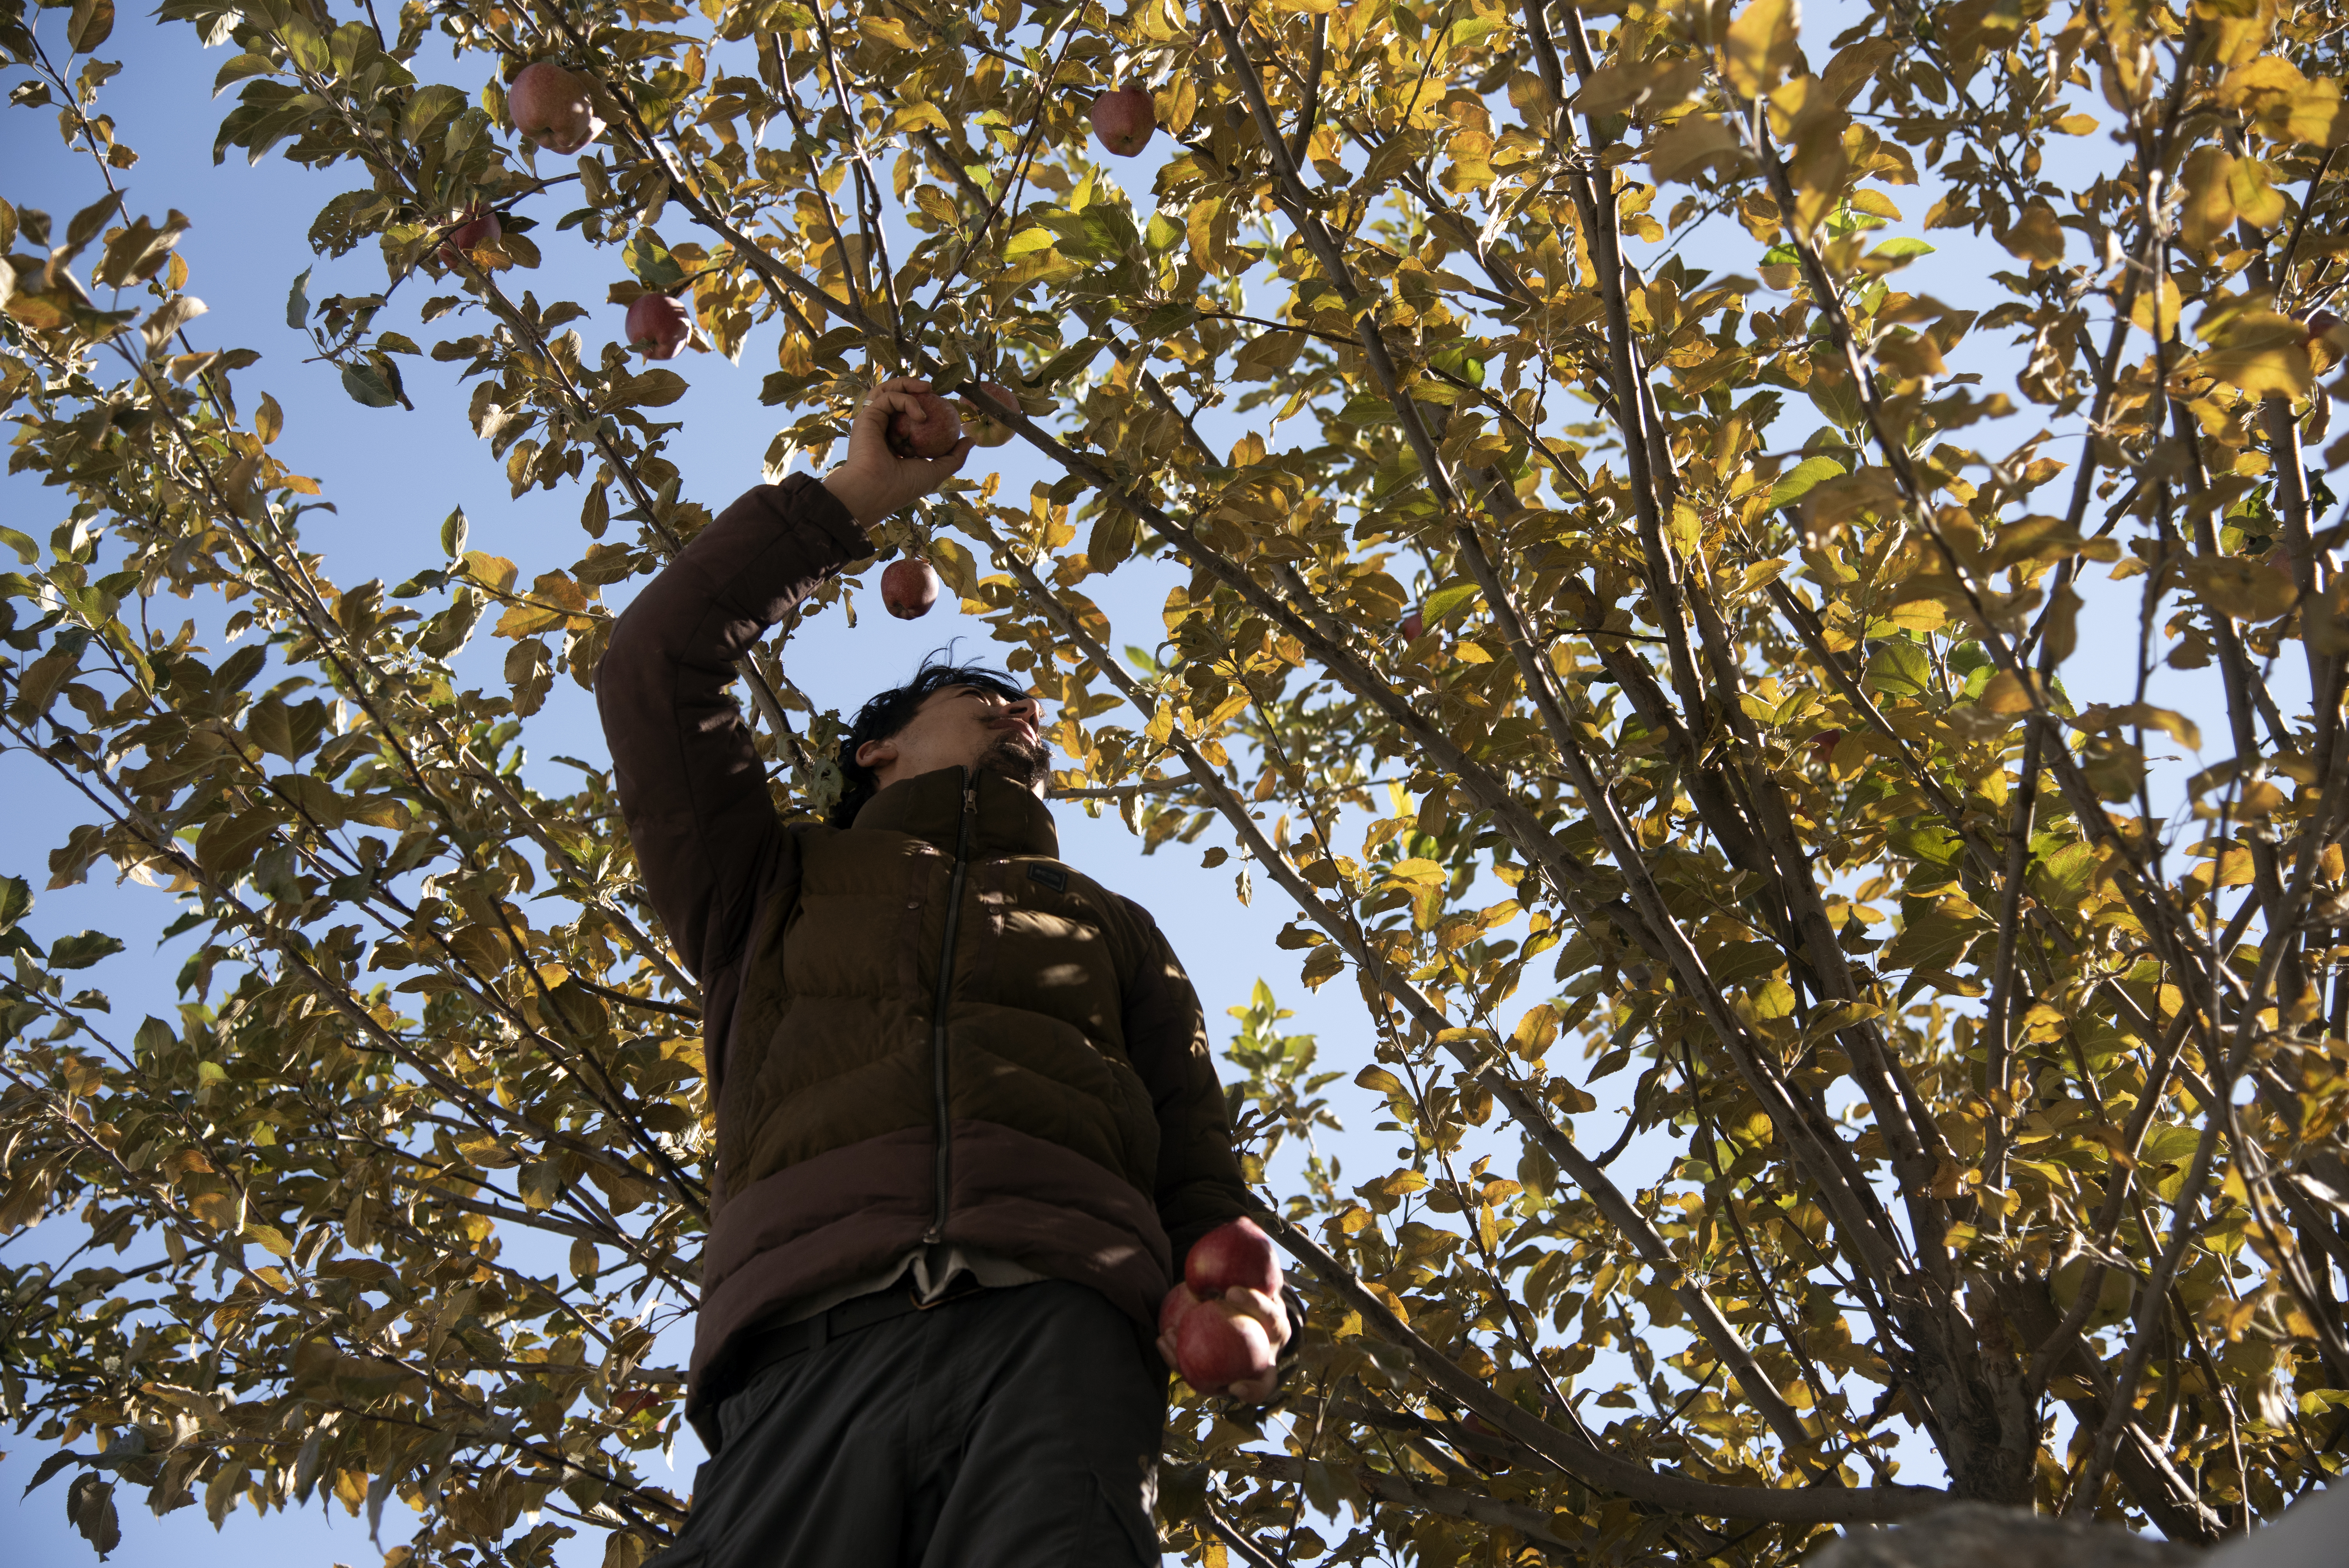 A man examines tree foliage against a backdrop of leaves and a blue sky (image: Sugato Mukherjee)